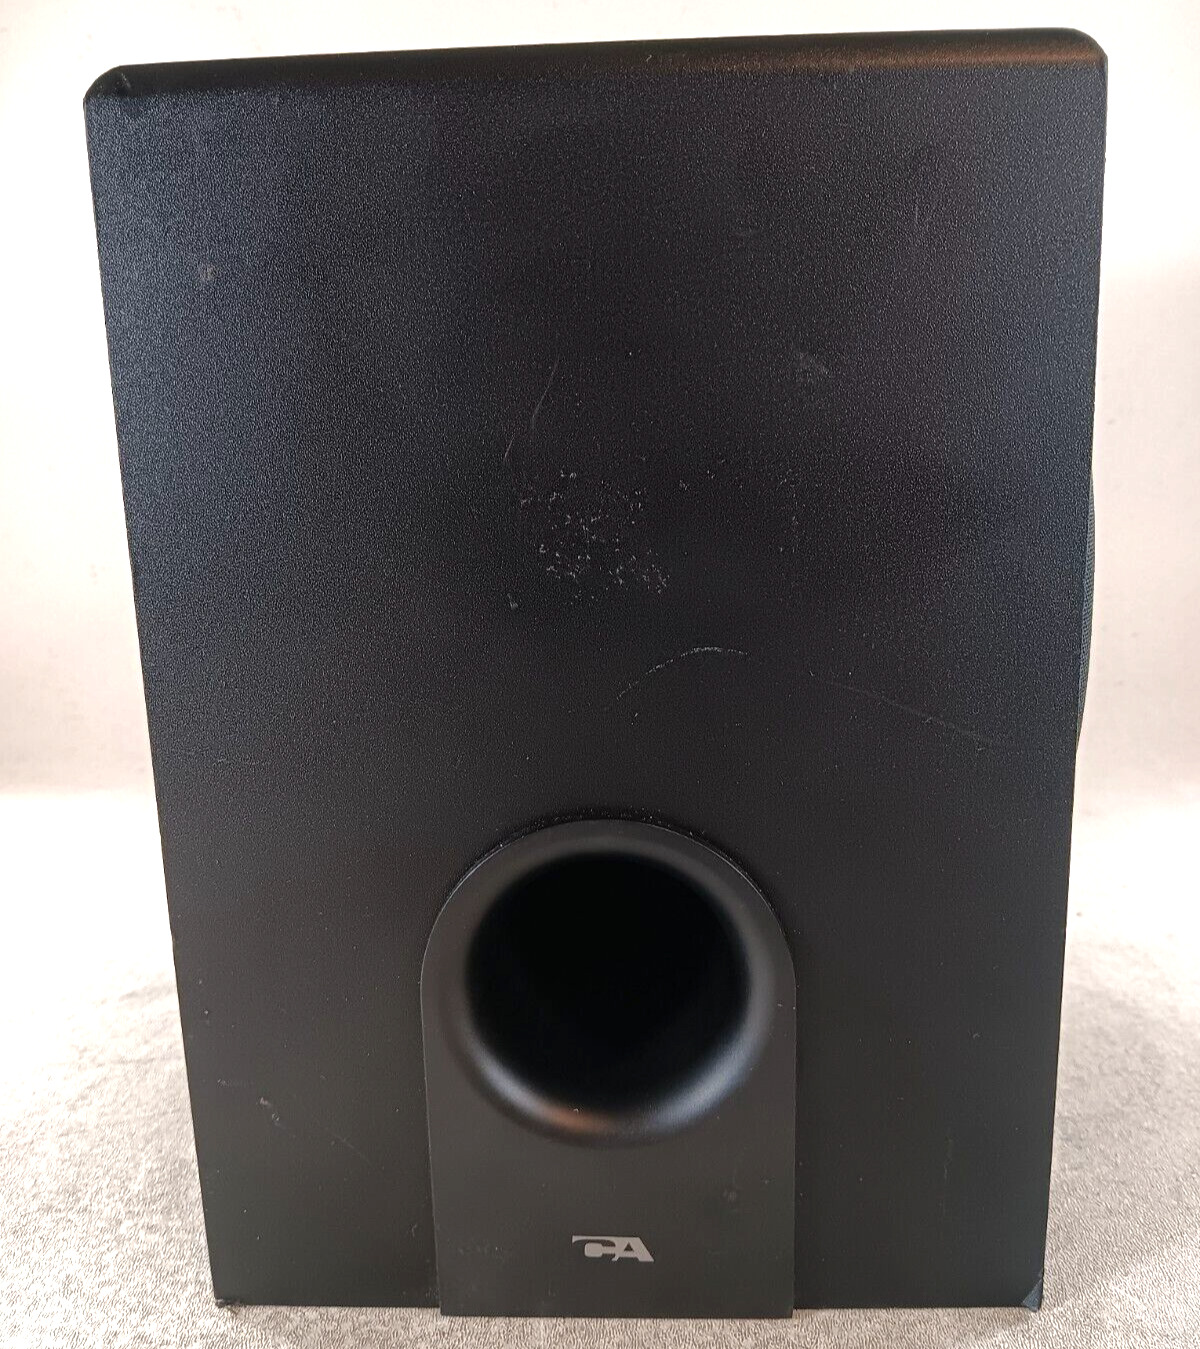 Cyber Acoustics Subwoofer Only CA-3602 In Black Color (Slight scuff on rear top)